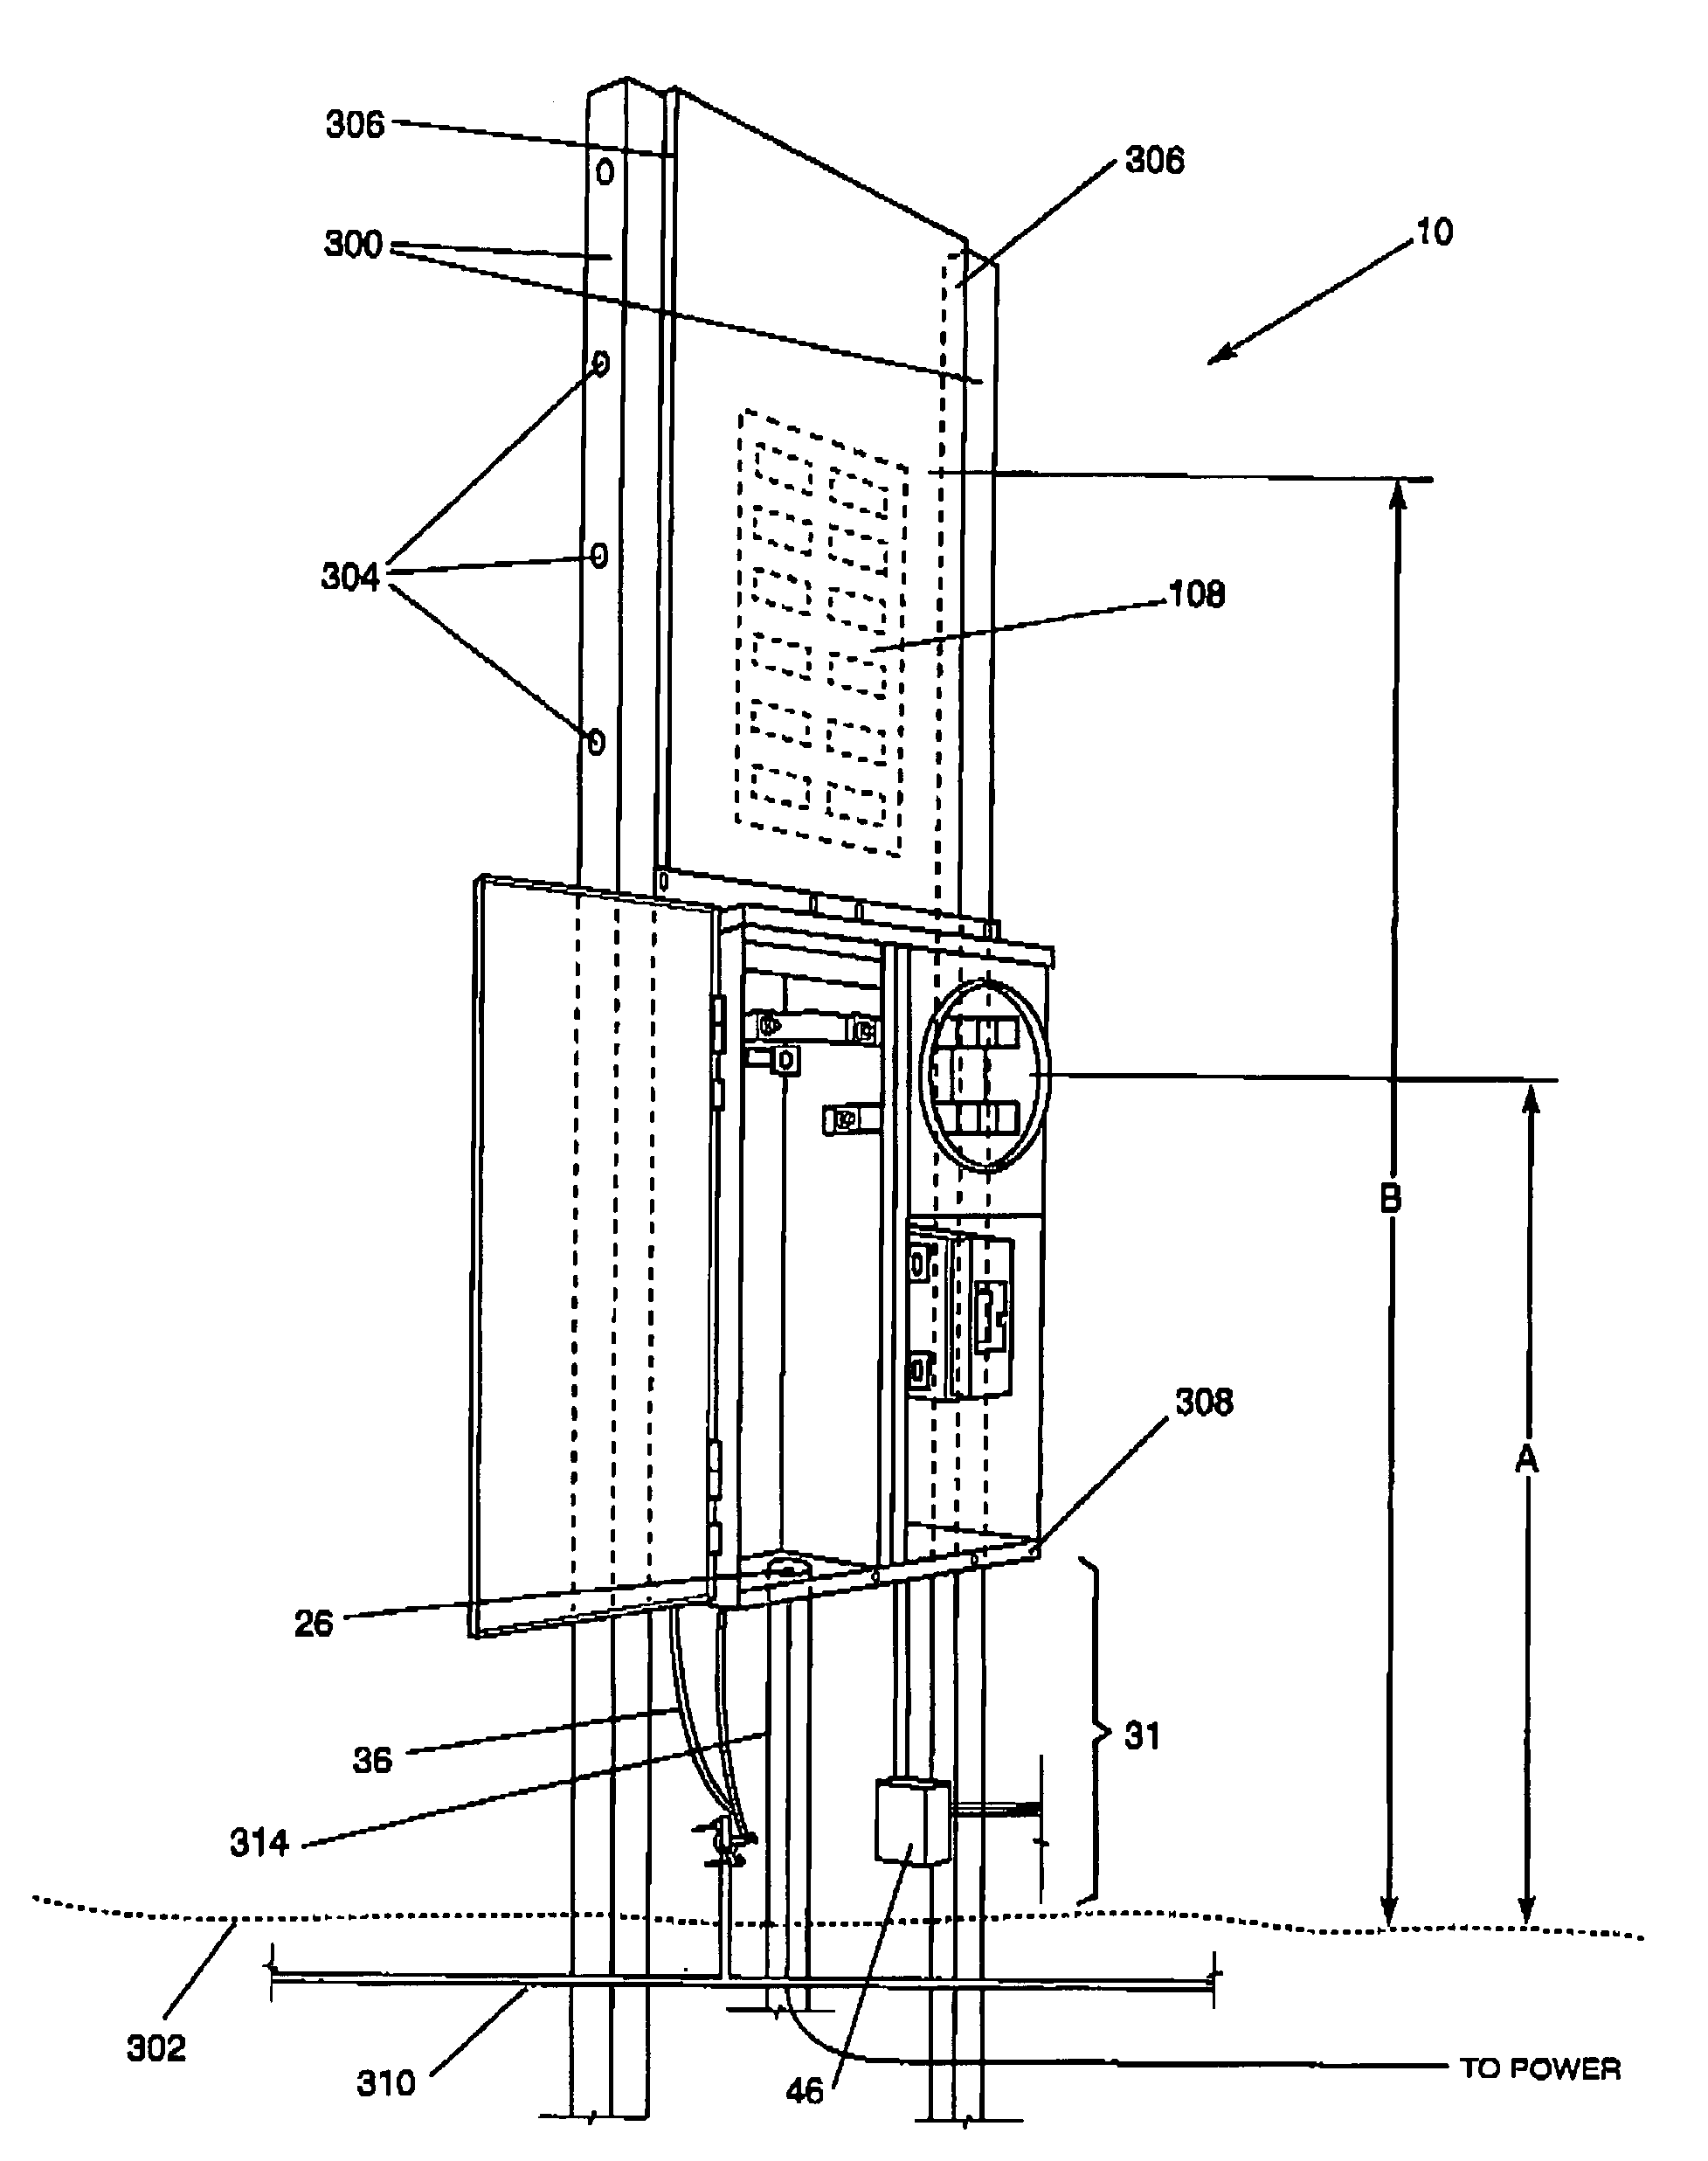 Combination service entrance apparatus for temporary and permanent use